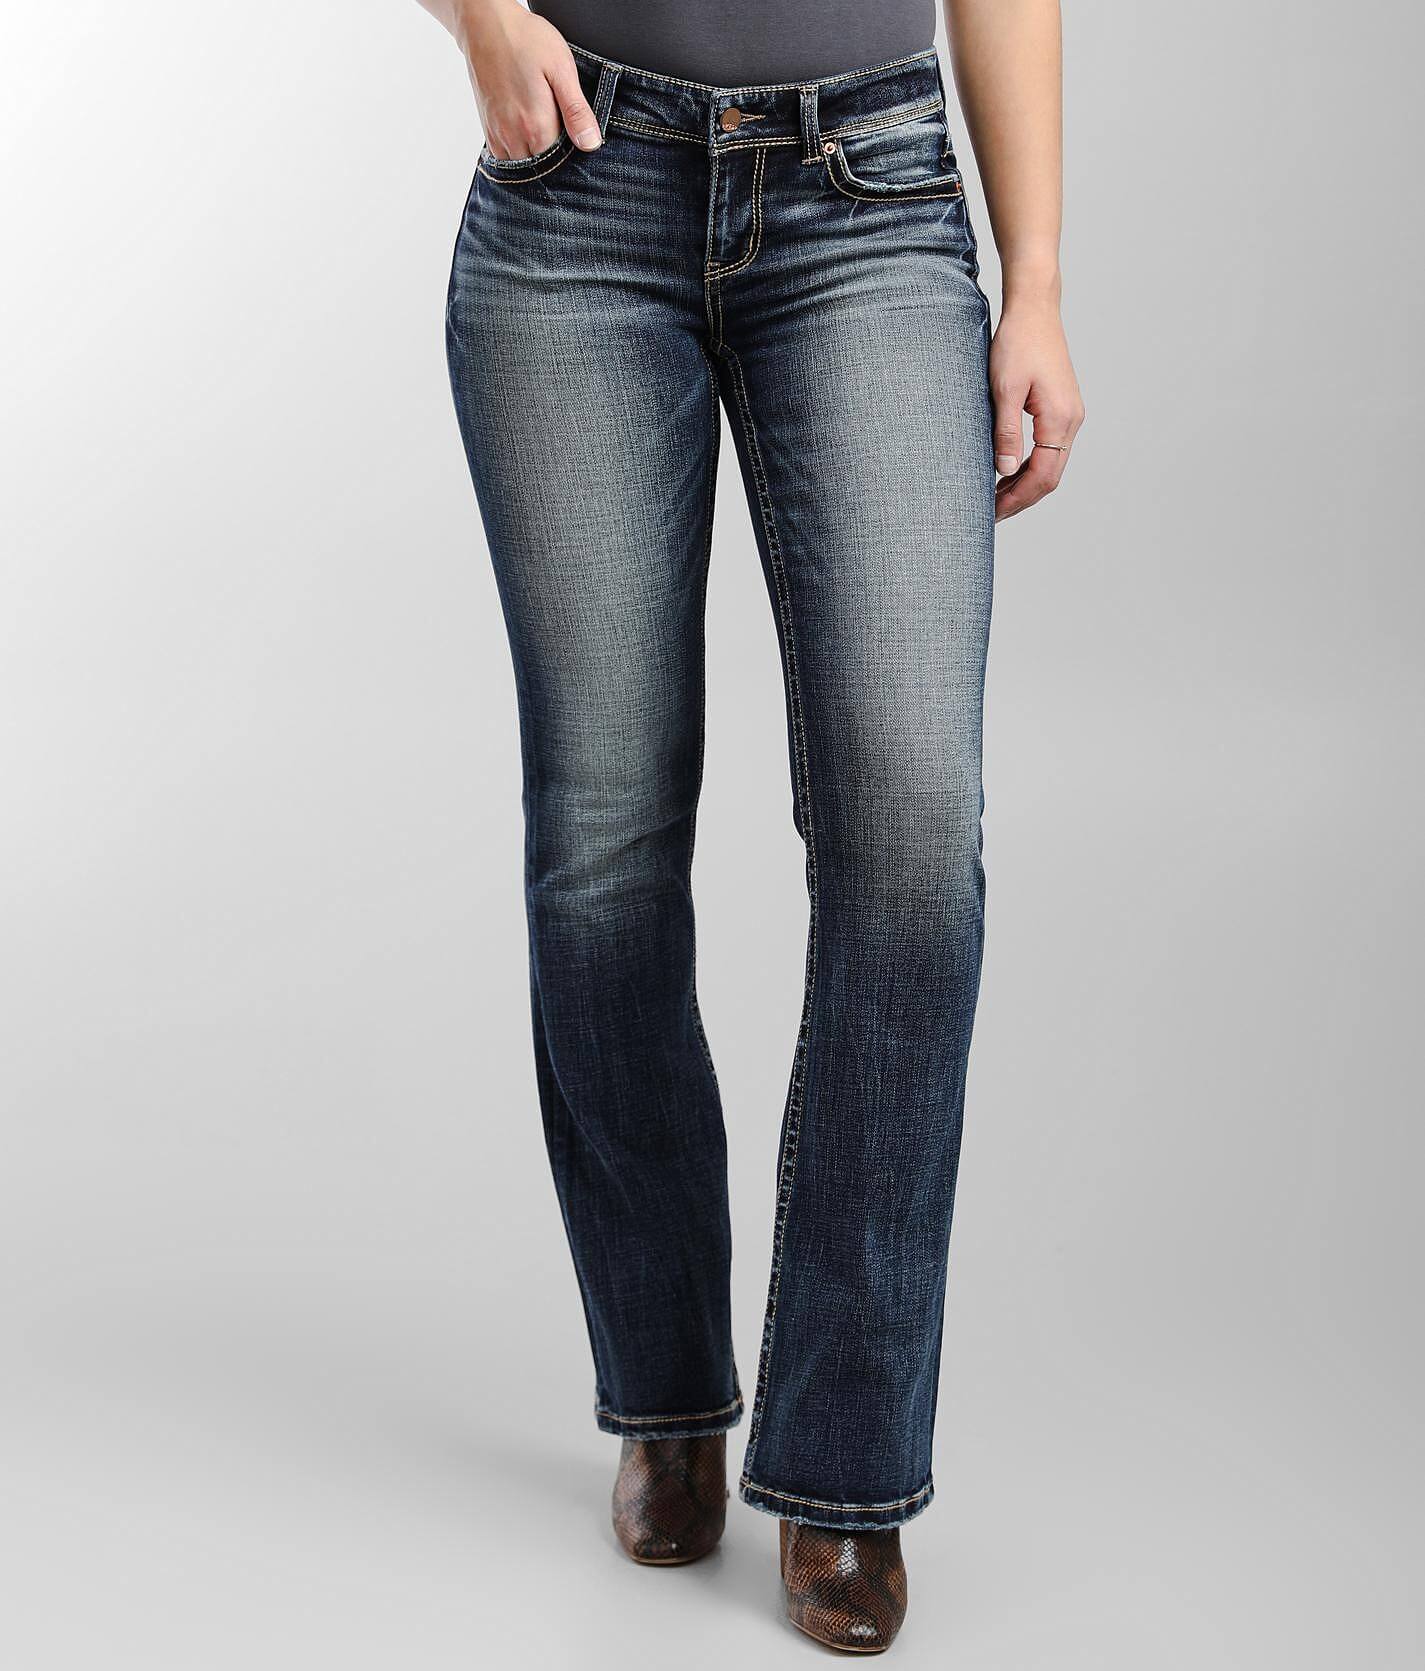 buckle stretch jeans